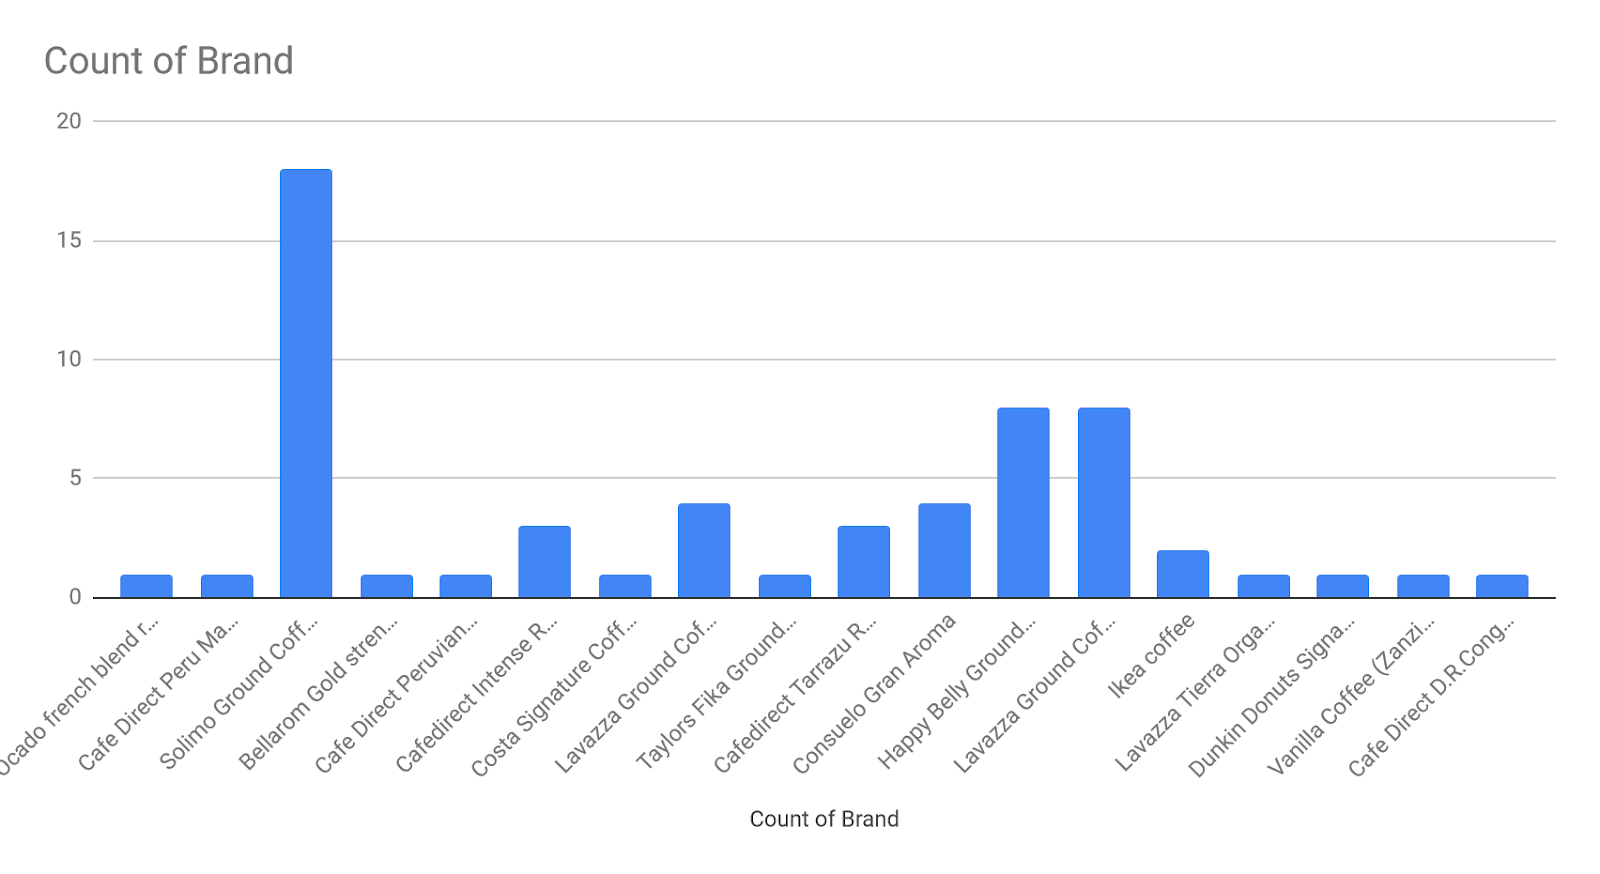 Count of brands of coffee bought